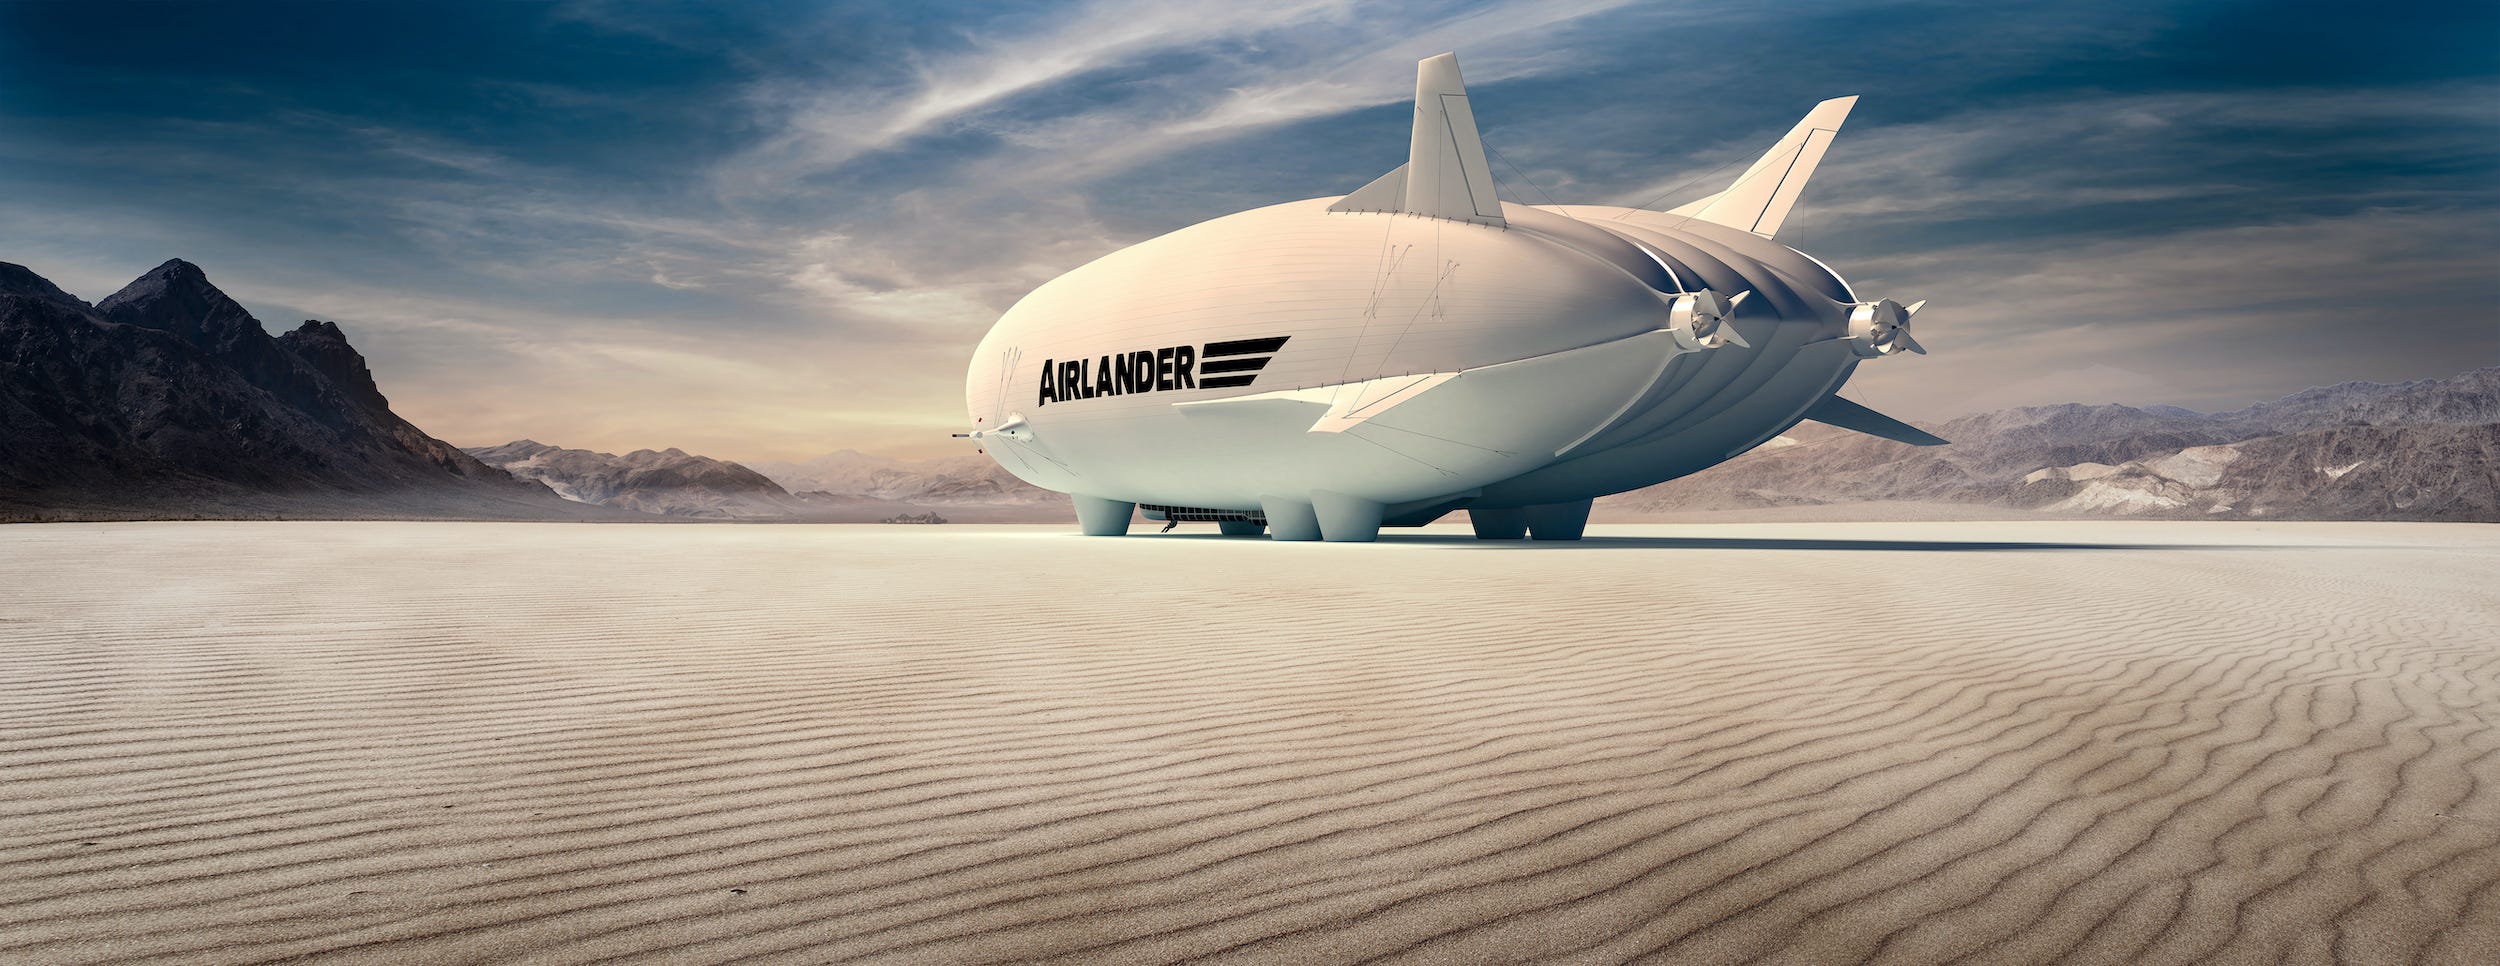 The Airlander 10 in a desert